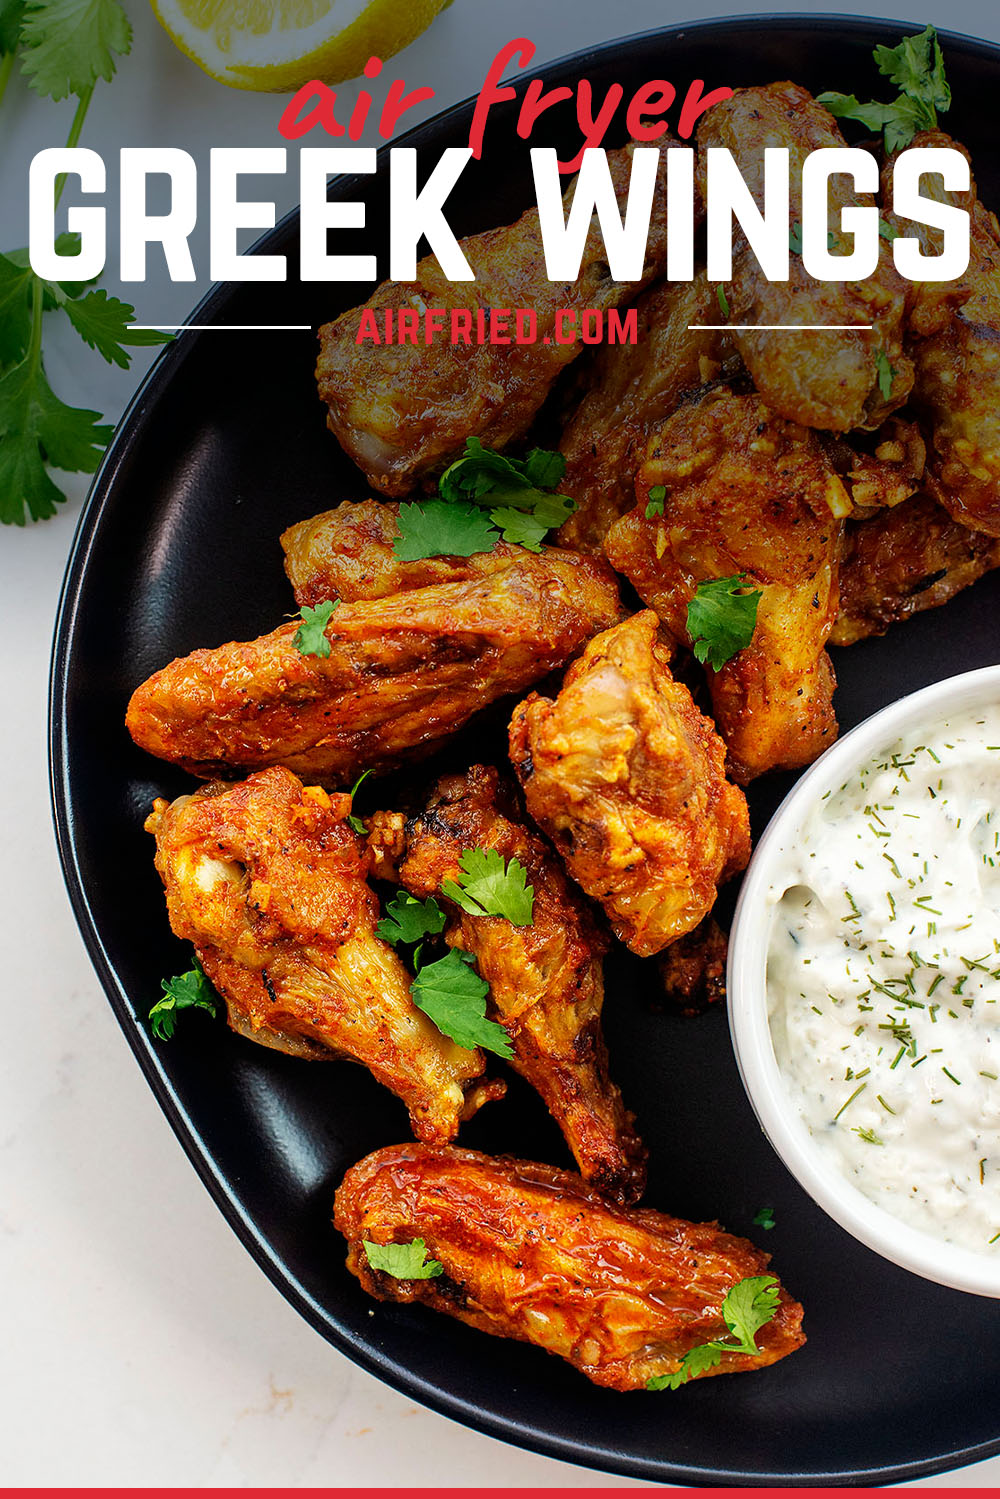 These greek chicken wings were made in the air fryer.  They turned out really good, and might be my new favorite seasoning!